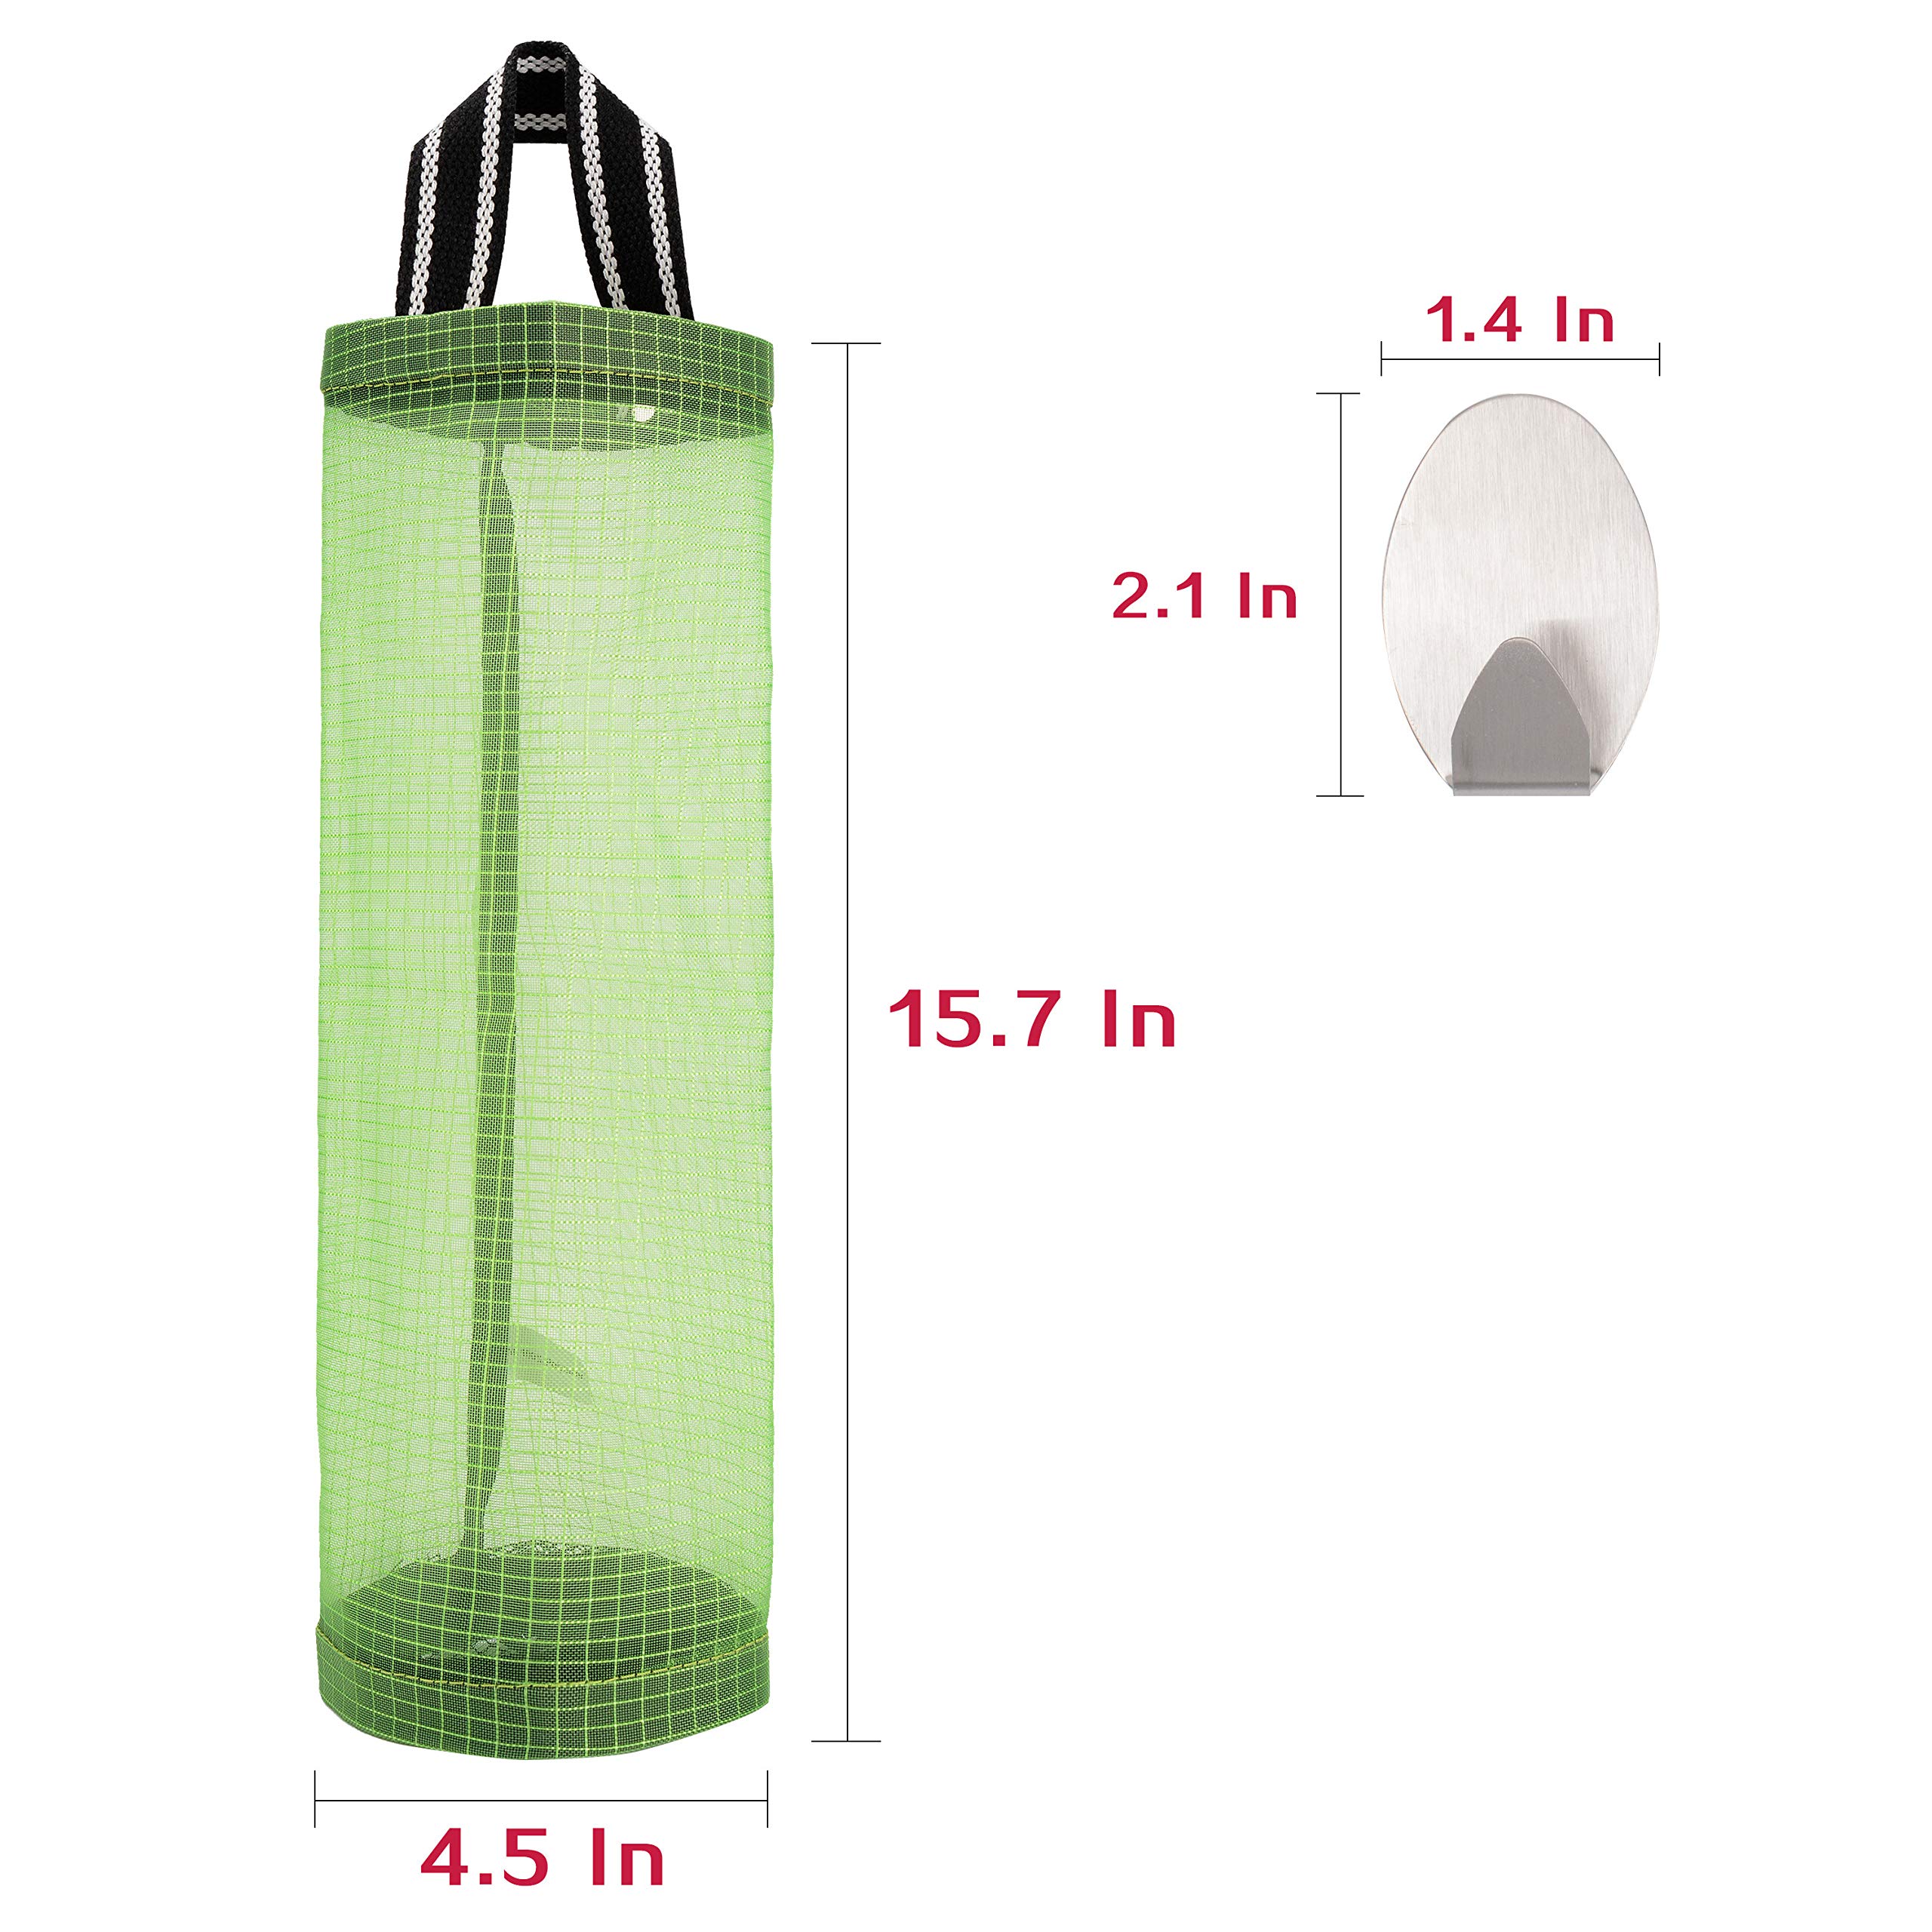 Plastic Bag Holder Sulimy Dispensers Folding Mesh Garbage Bags 2pcs Hanging Storage Bag Trash bags Holder Organizer Recycling Grocery Pocket Containers with 2 Hooks for Home and Kitchen Grey & Green